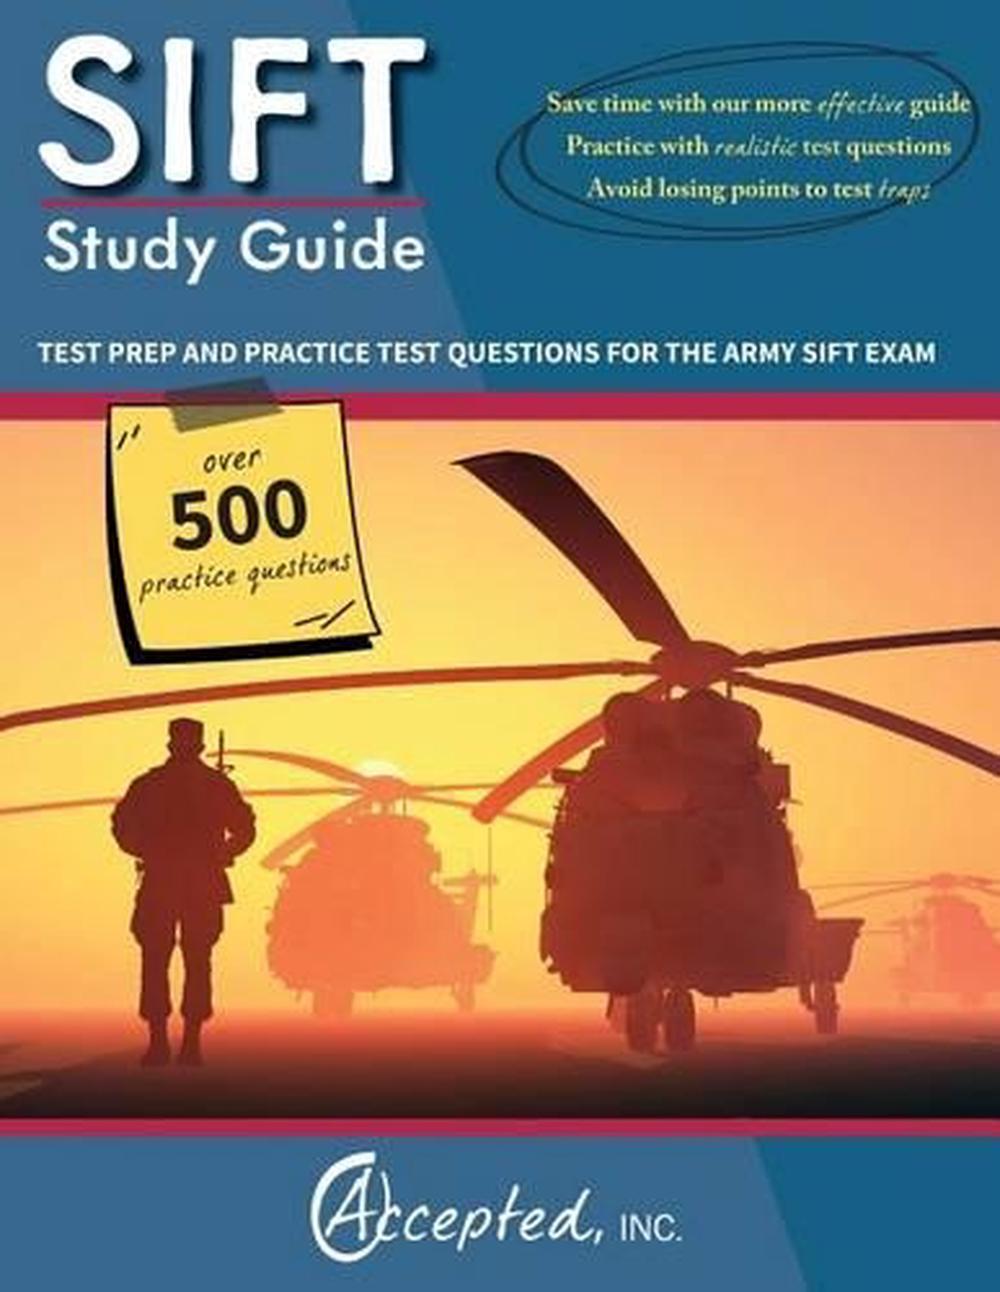 Sift Study Guide Test Prep and Practice Test Questions for the Army